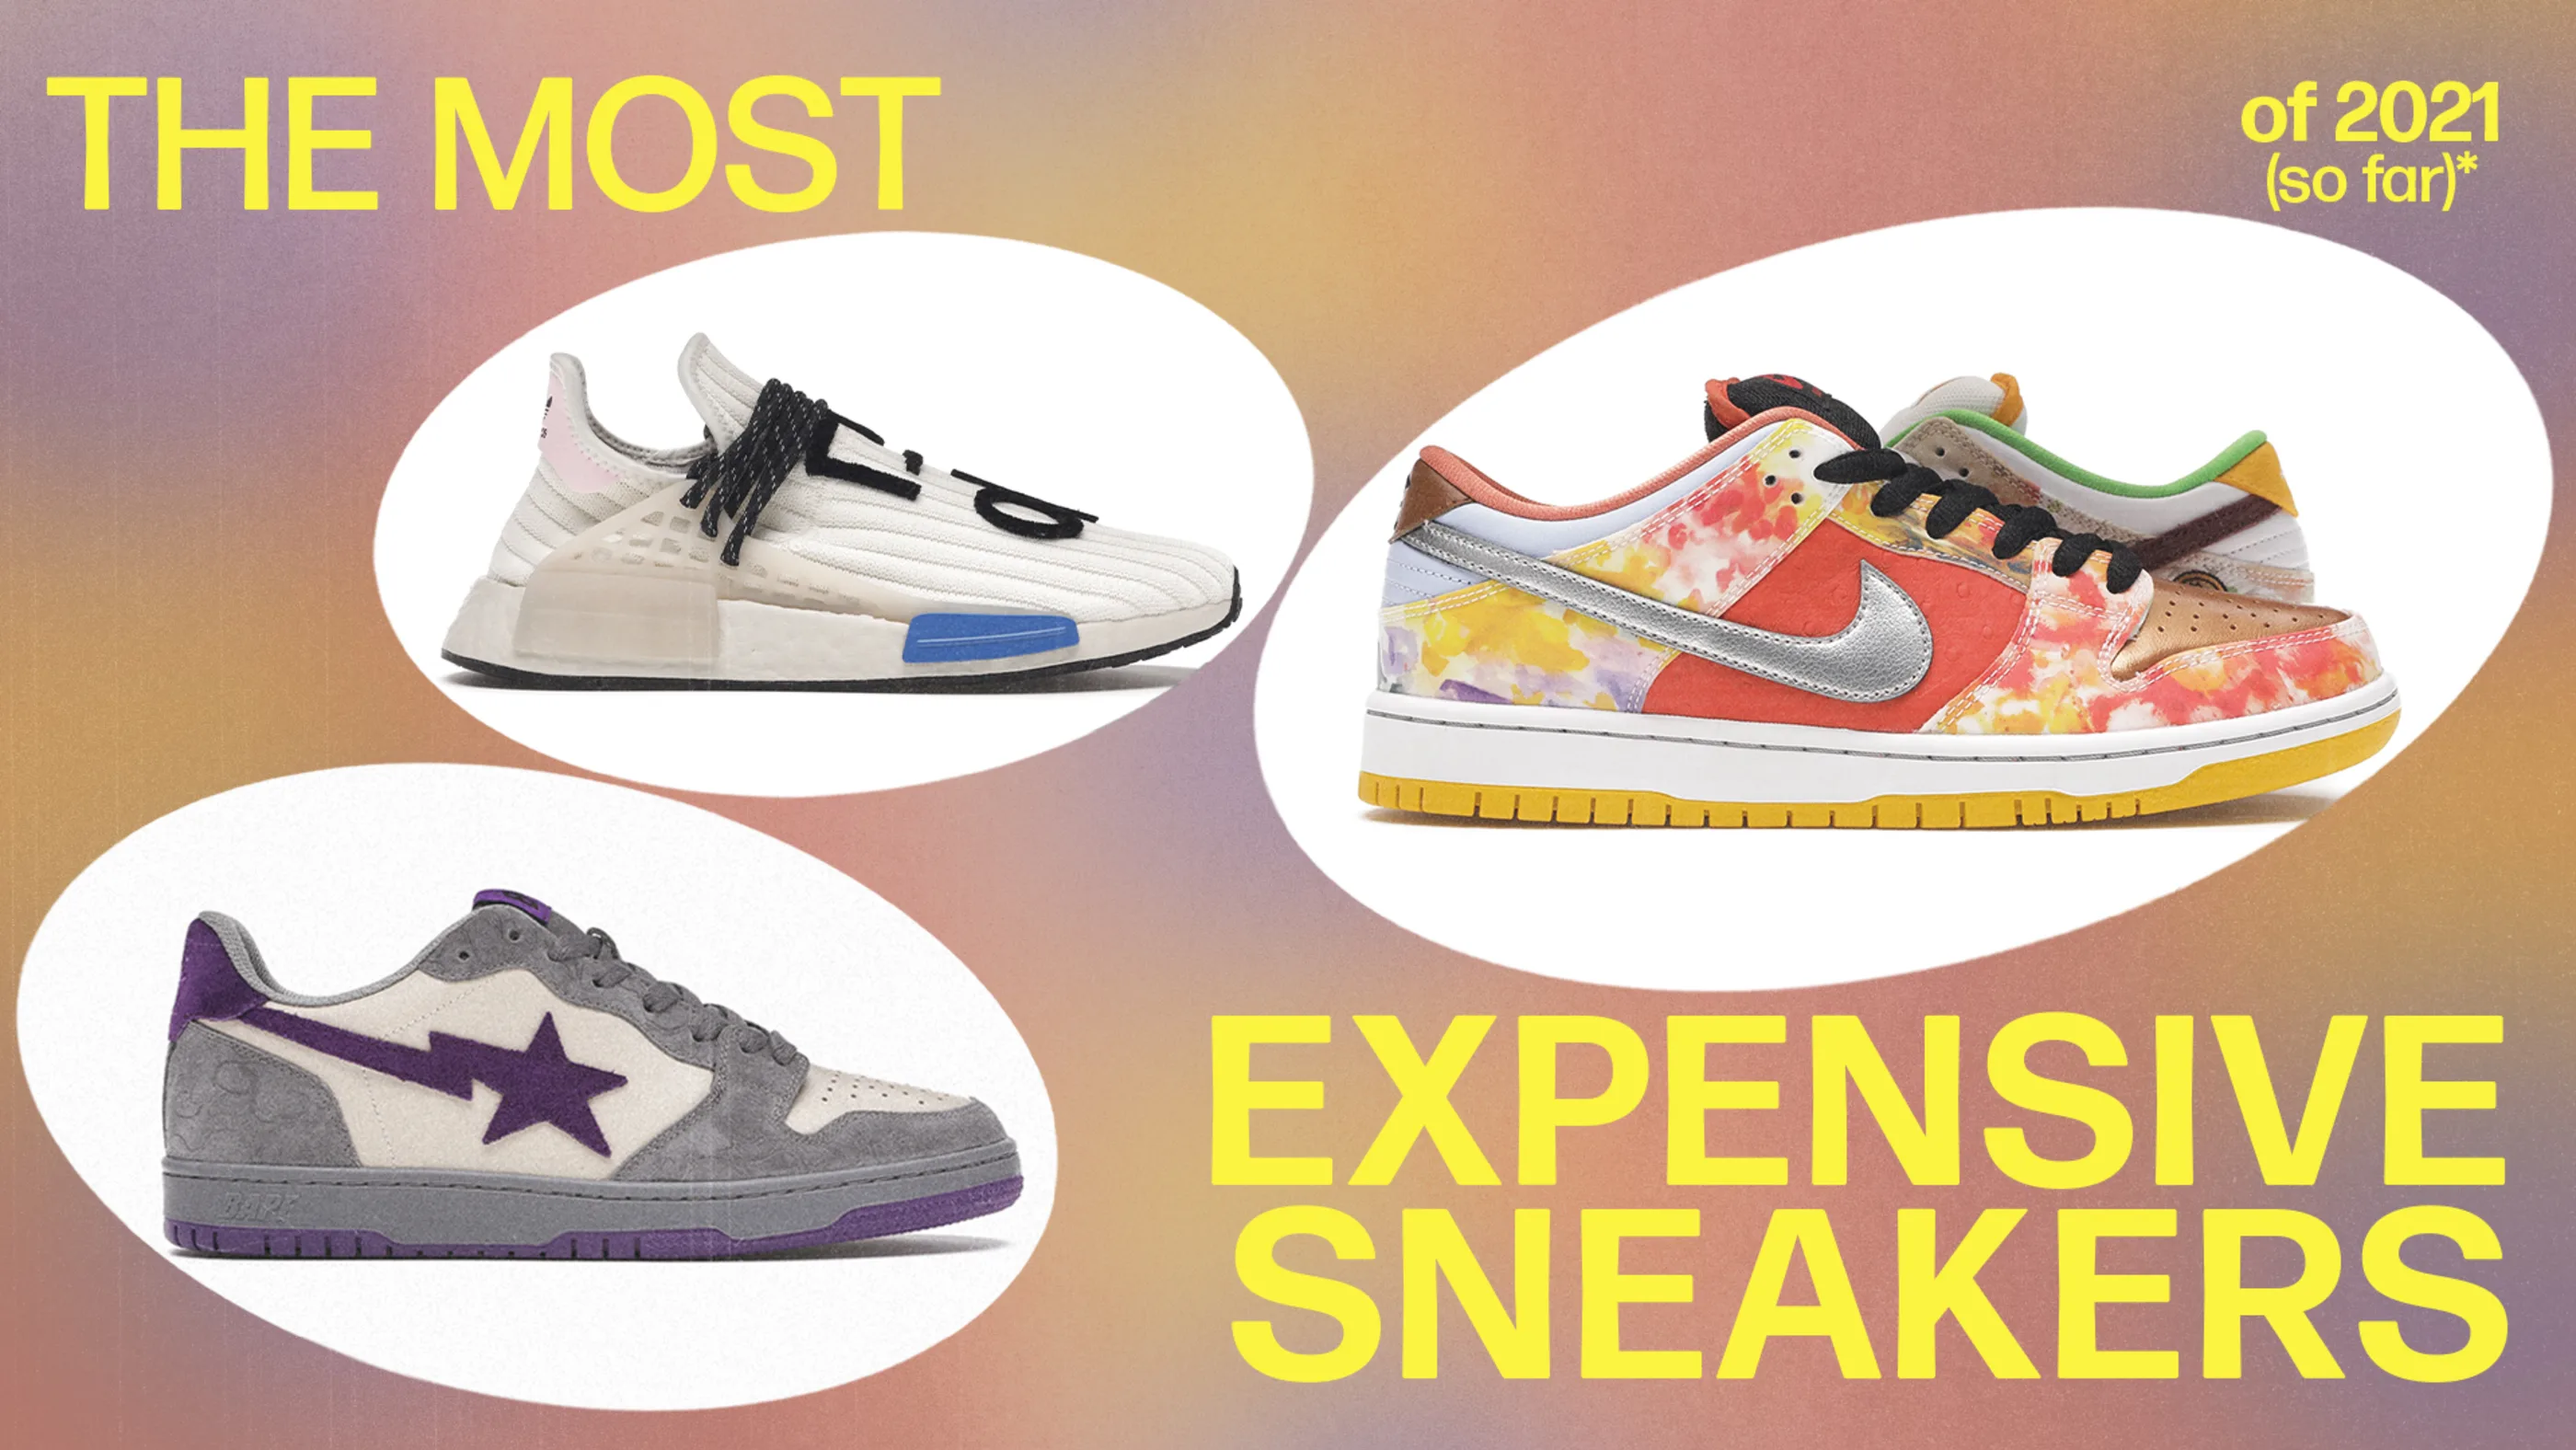 The Most Expensive Sneakers of 2021